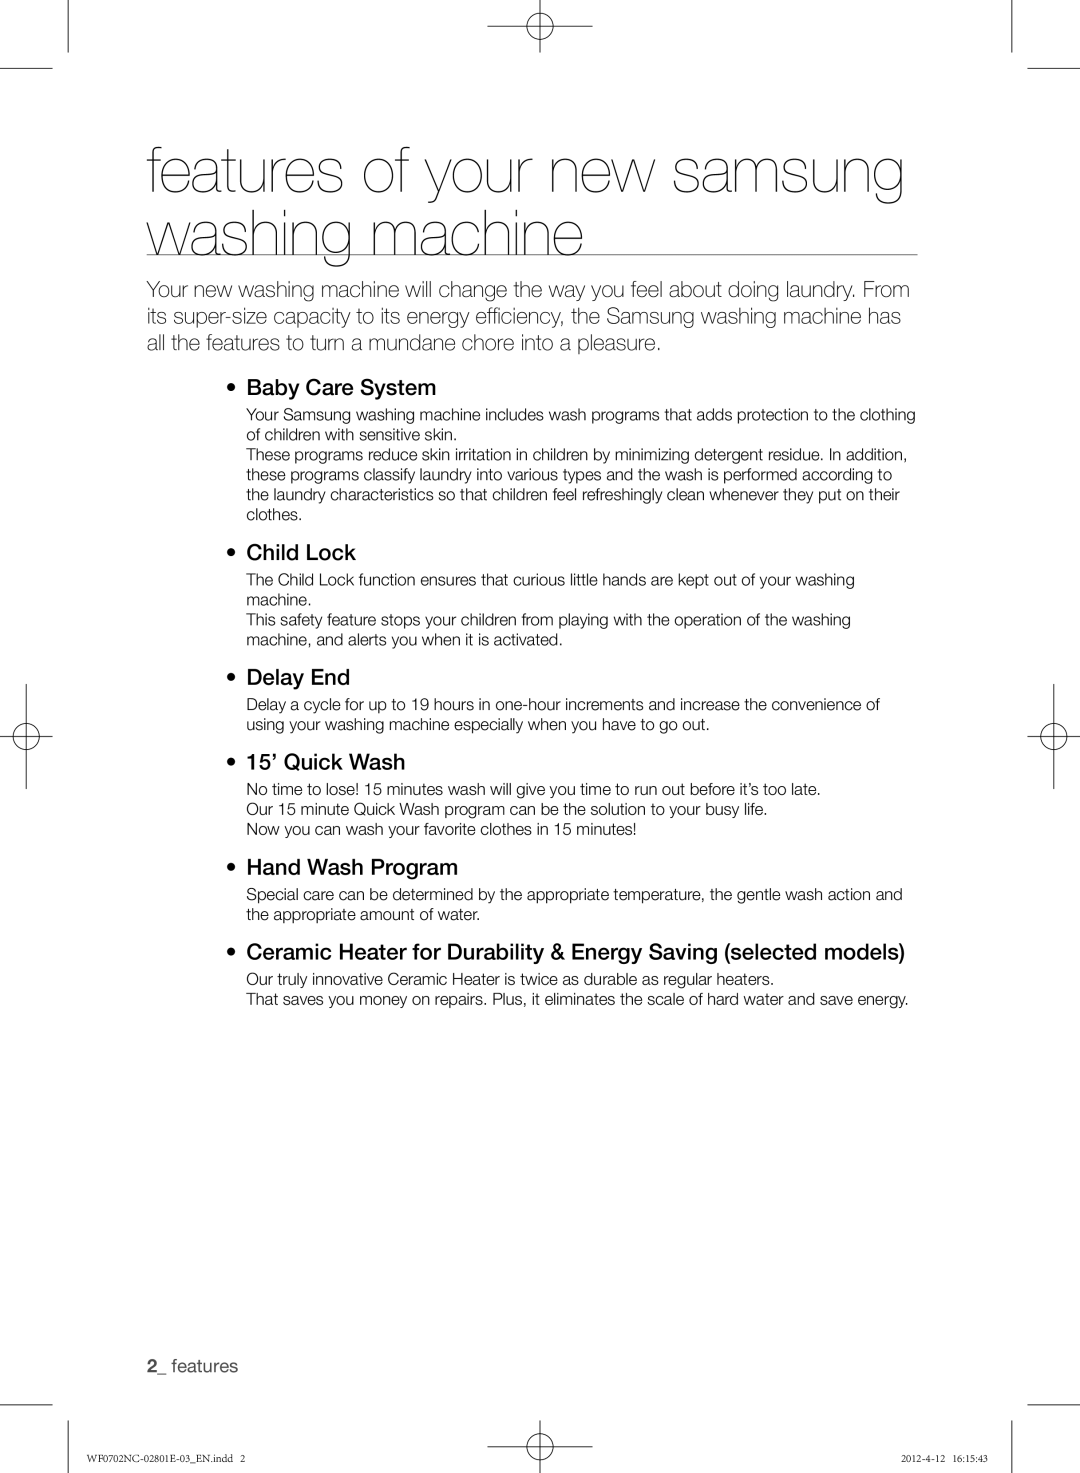 Samsung WF0702NCW/XEH, WF0702NCE/XEH Features of your new samsung washing machine, Child Lock, Delay End, 15’ Quick Wash 